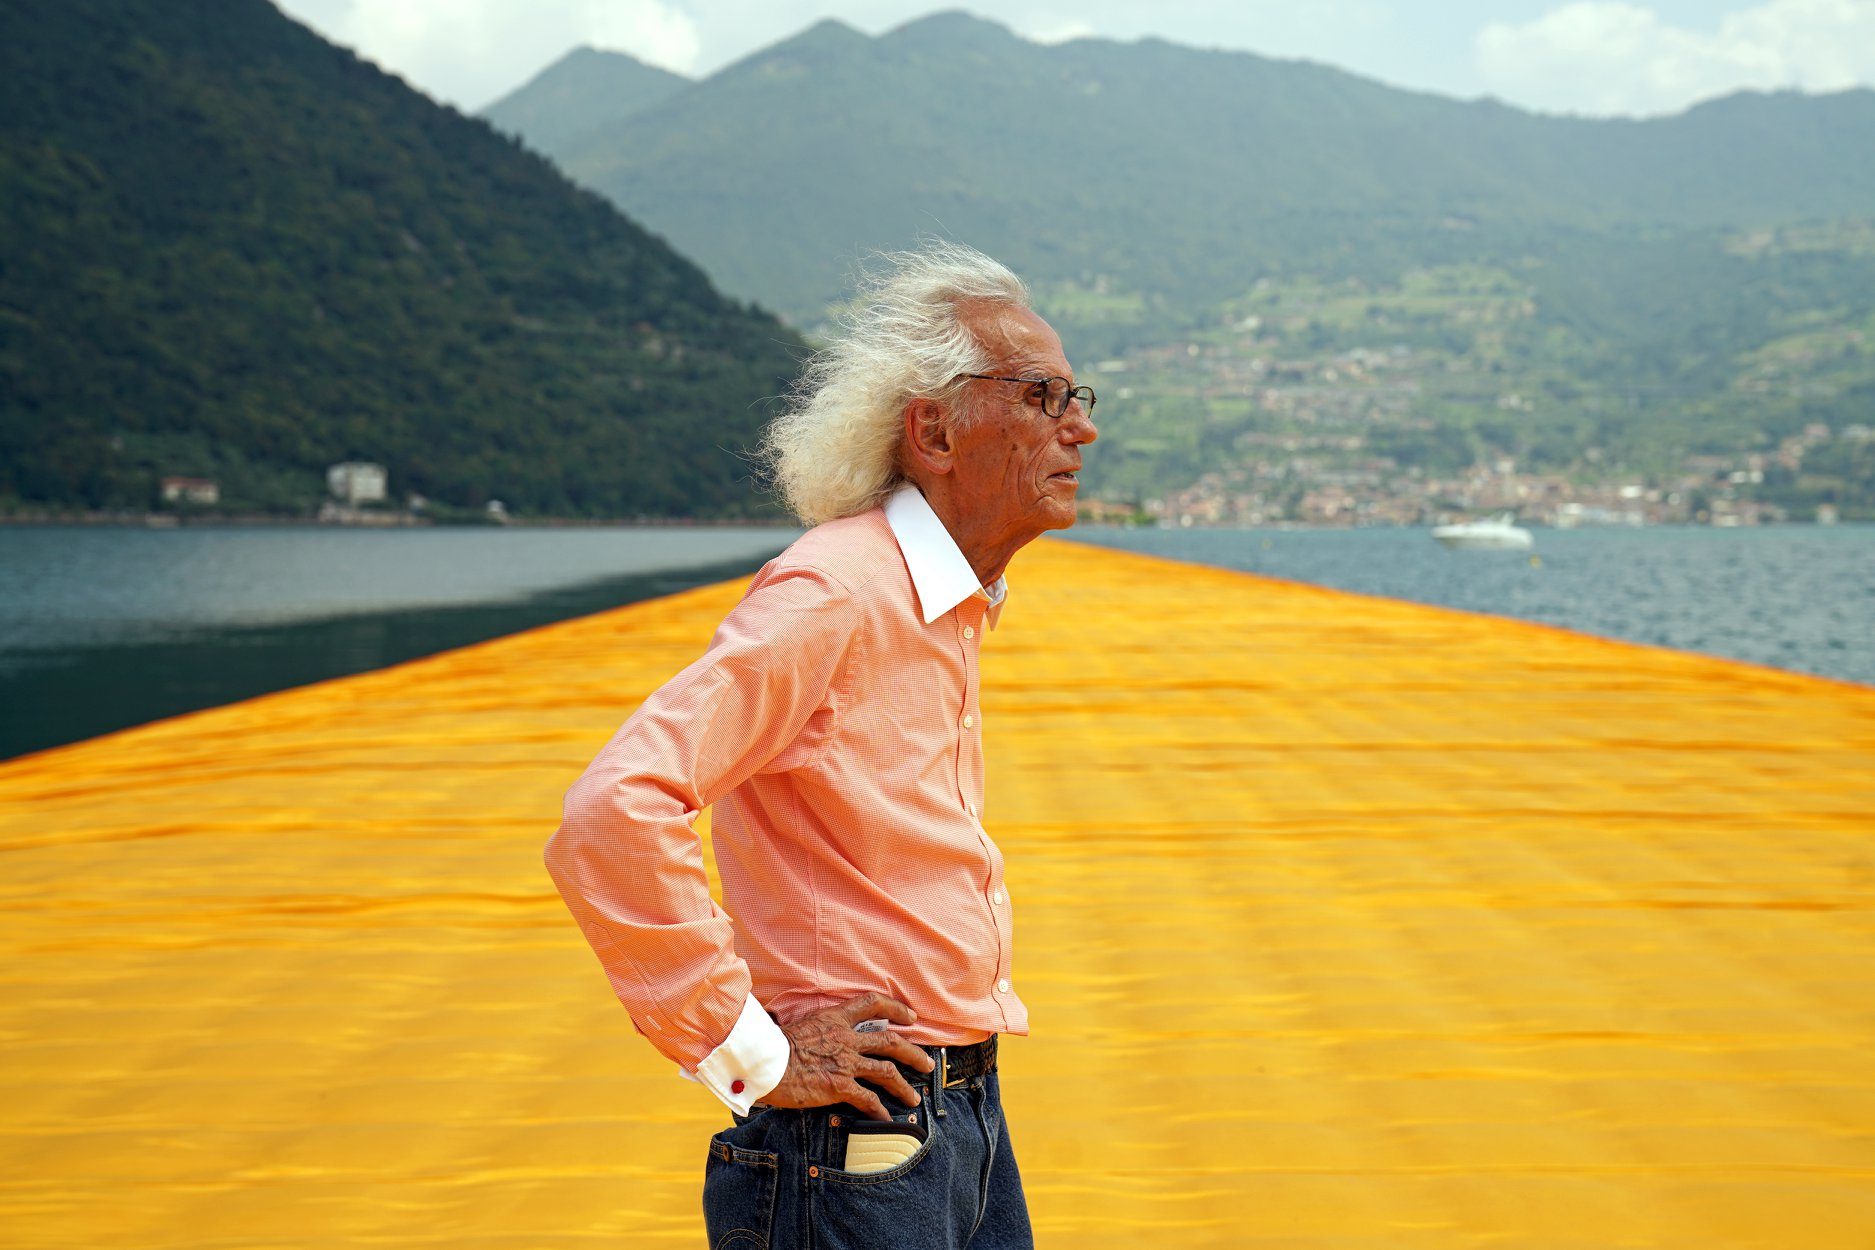 Artist Christo who wrapped Reichstag in fabric dies aged 84